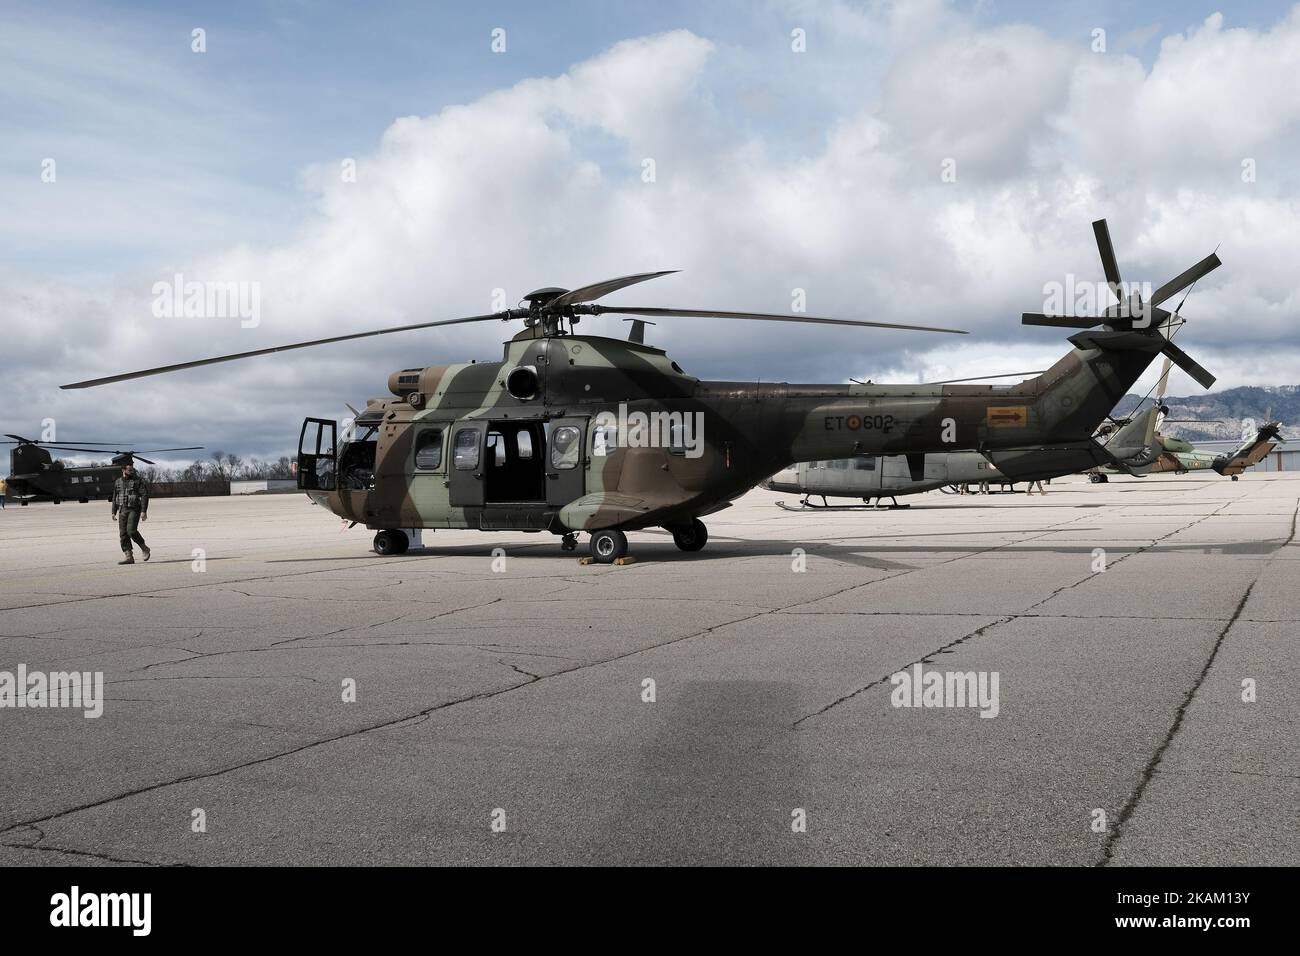 AS 532 Cougar is a medium-sized twin-engine multi-purpose helicopter manufactured by the Eurocopter Group in the FAMET Military Base on March 6, 2017 in Colmenar Viejo, Spain. (Photo by Oscar Gonzalez/NurPhoto) *** Please Use Credit from Credit Field *** Stock Photo